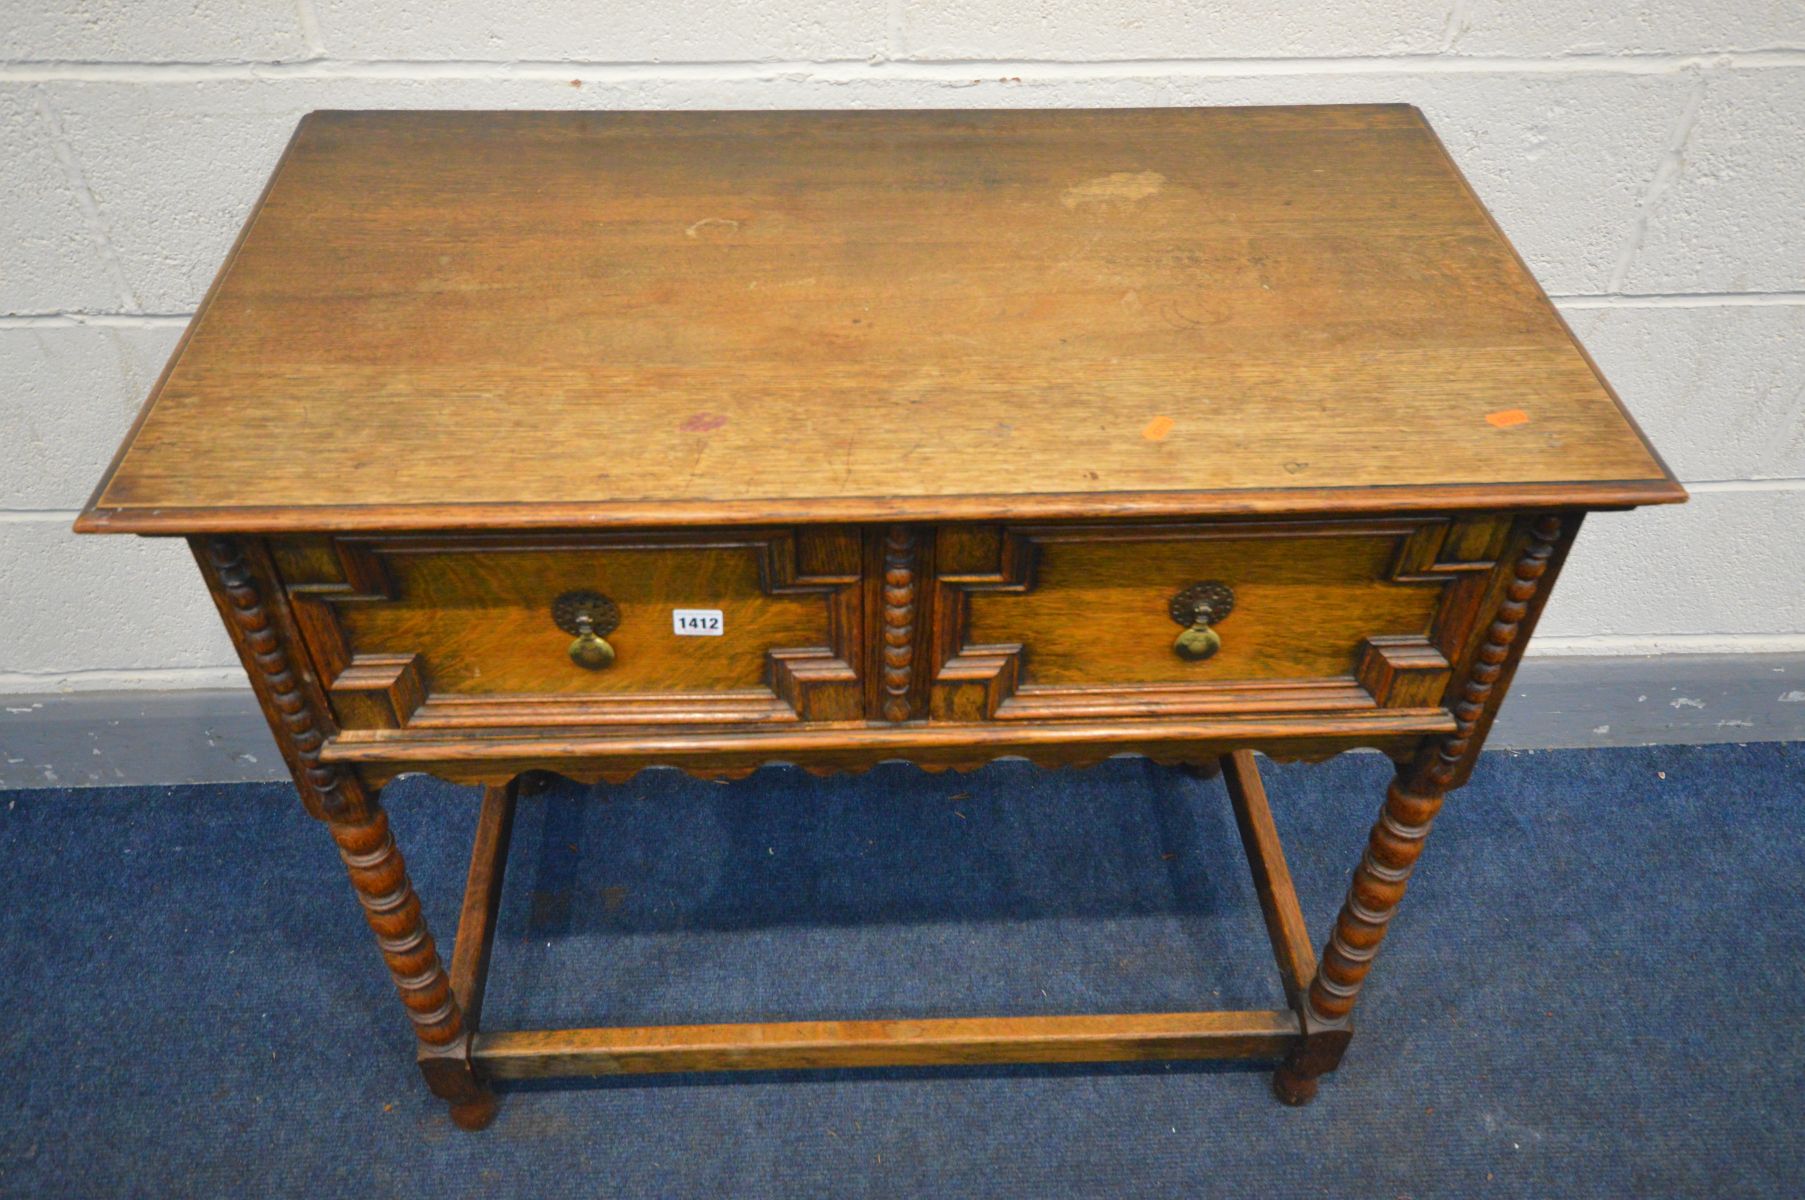 AN OAK SIDE TABLE, two drawers with geometric detail, on bobbin turned legs united by a box - Image 2 of 3